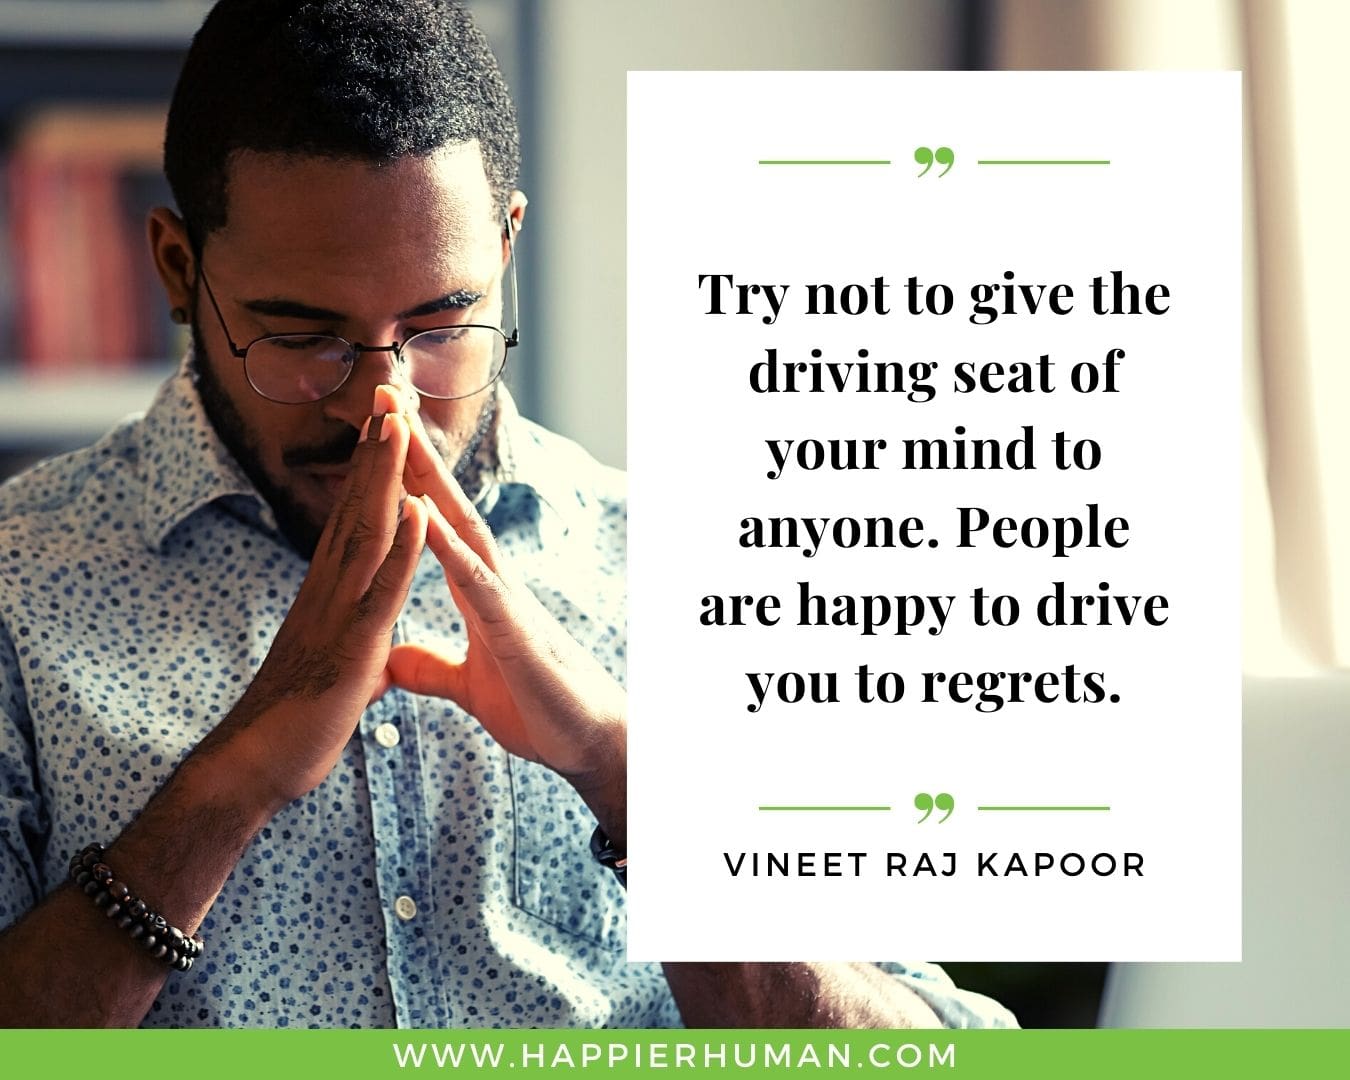 Overthinking Quotes - “Try not to give the driving seat of your mind to anyone. People are happy to drive you to regrets.” - Vineet Raj Kapoor